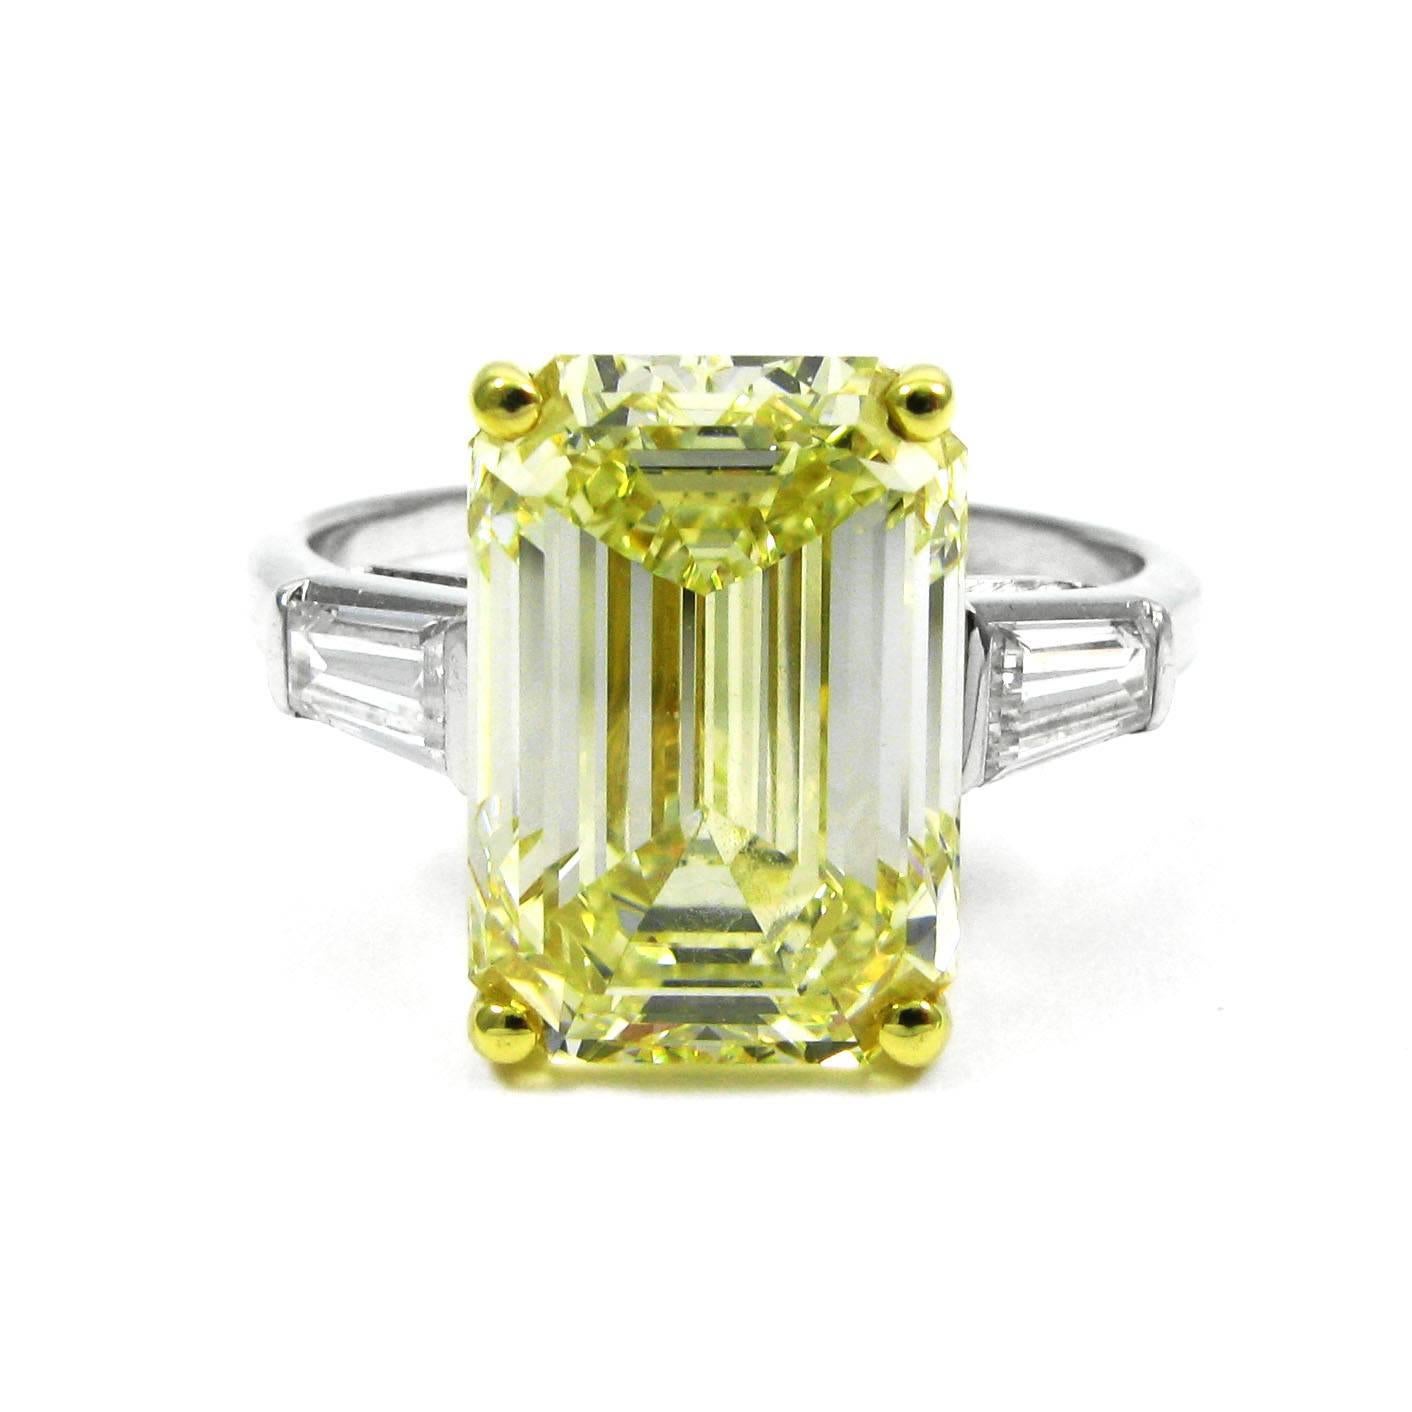 A drop of sunshine! This ring features a cheerful 6.69 carat Fancy Light Yellow emerald-cut diamond set in an 18k yellow gold basket and flanked by two tapered baguette-cut white diamonds totaling approx. 0.85 carat. The stones are mounted in the